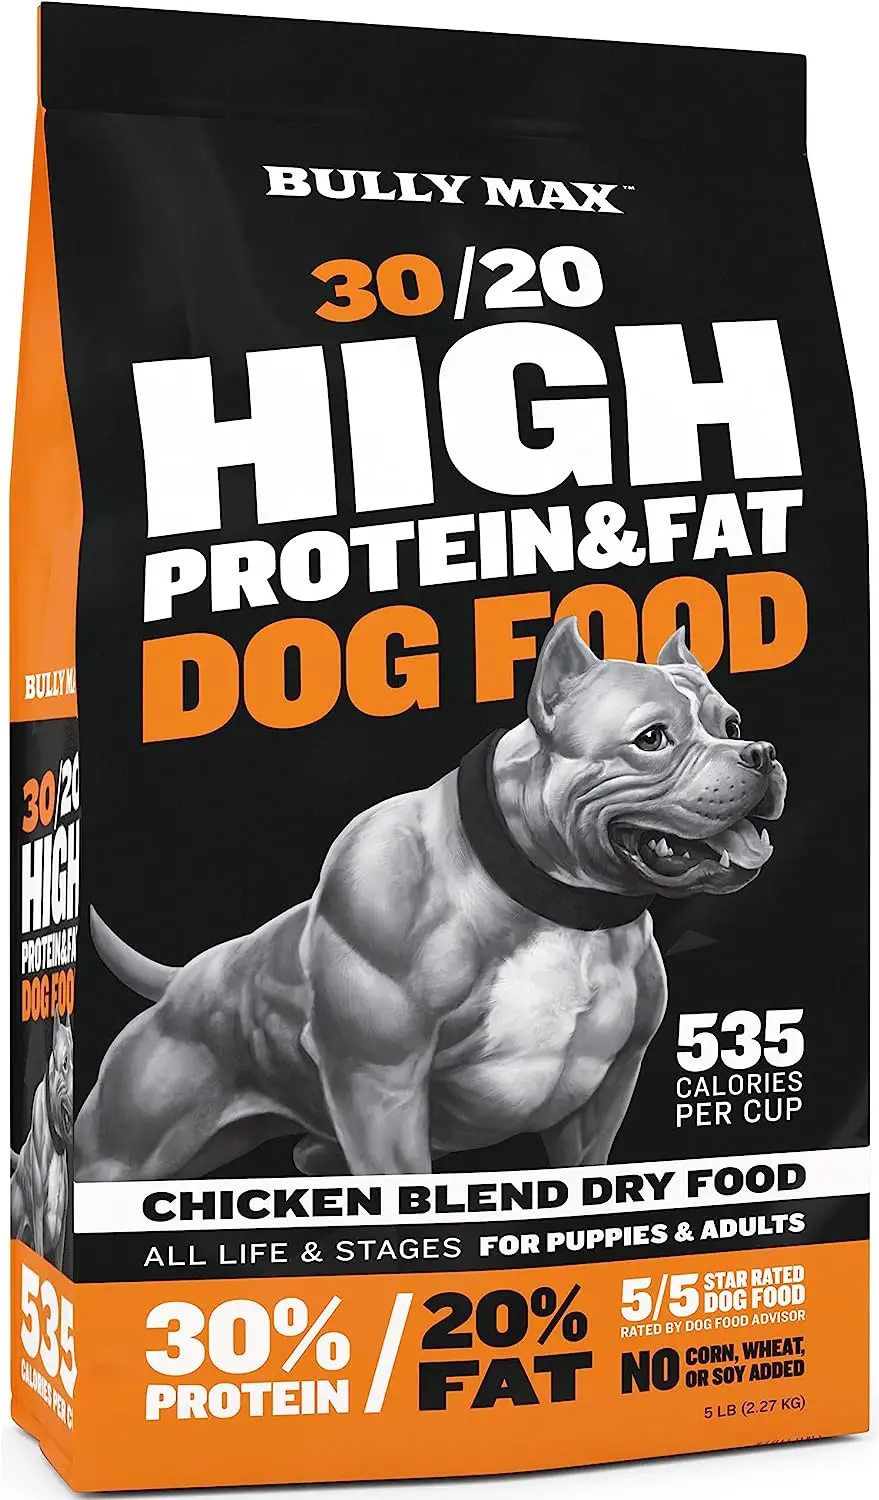 Bully Max 3020 High-Protein Dog Food, Chicken Blend